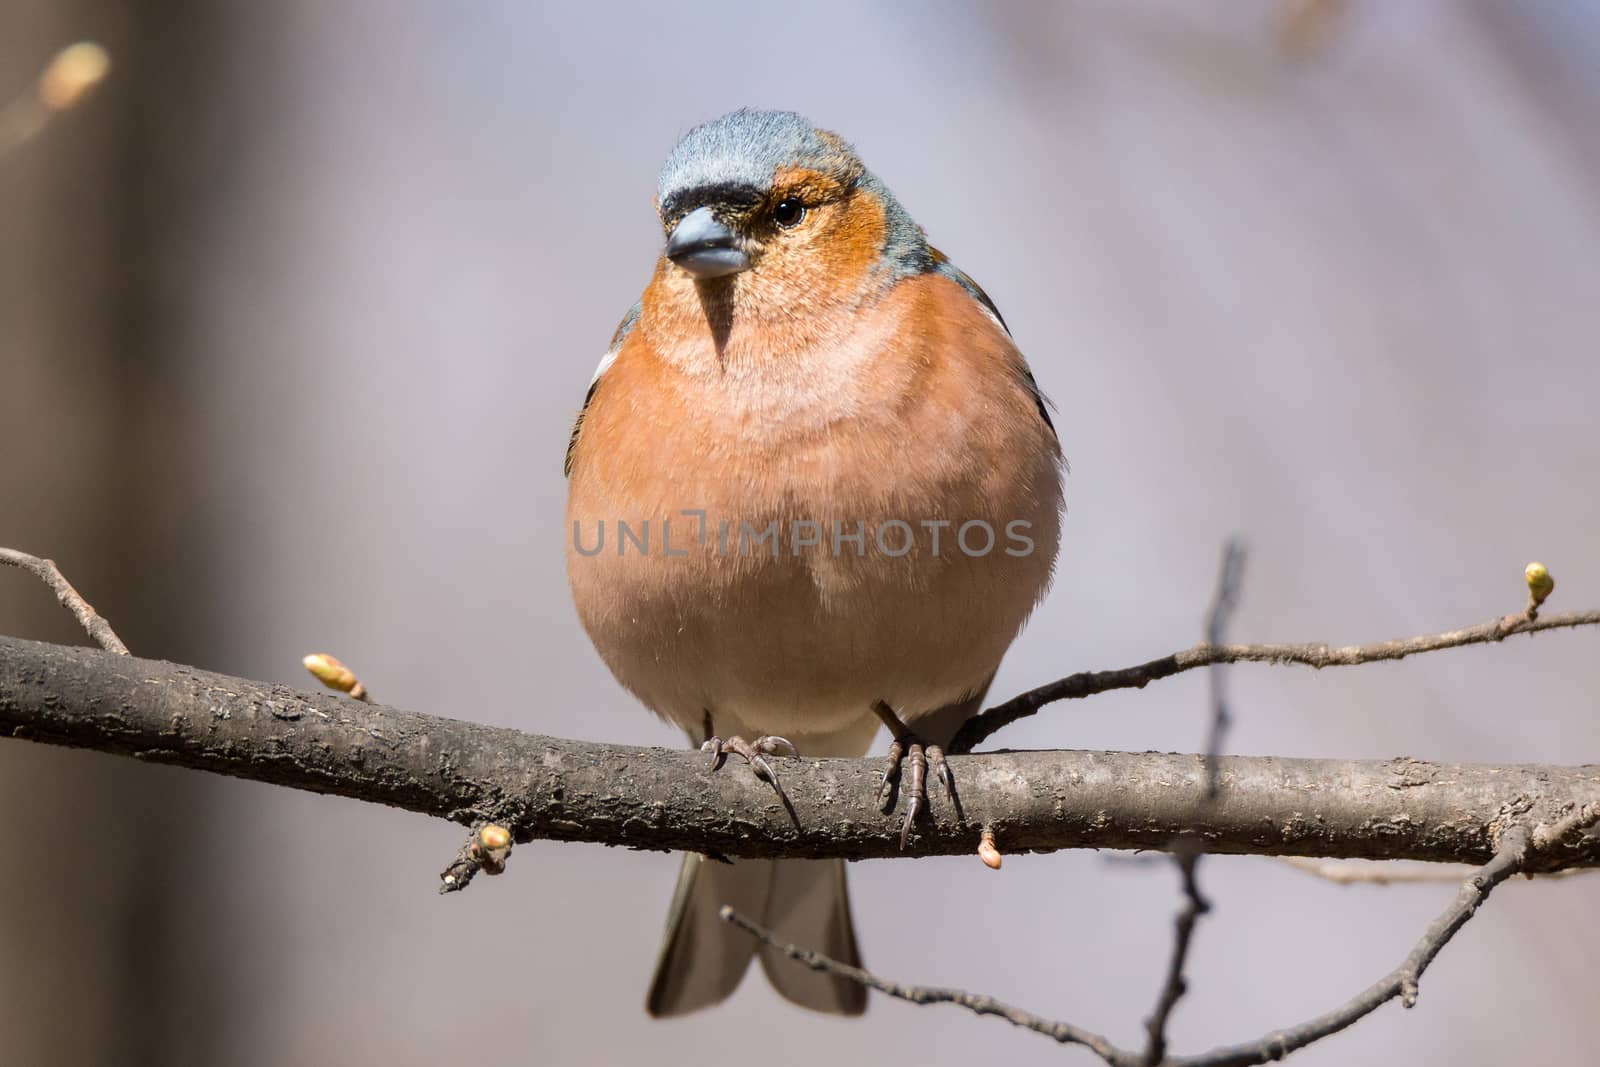 The photo depicts a finch on a branch